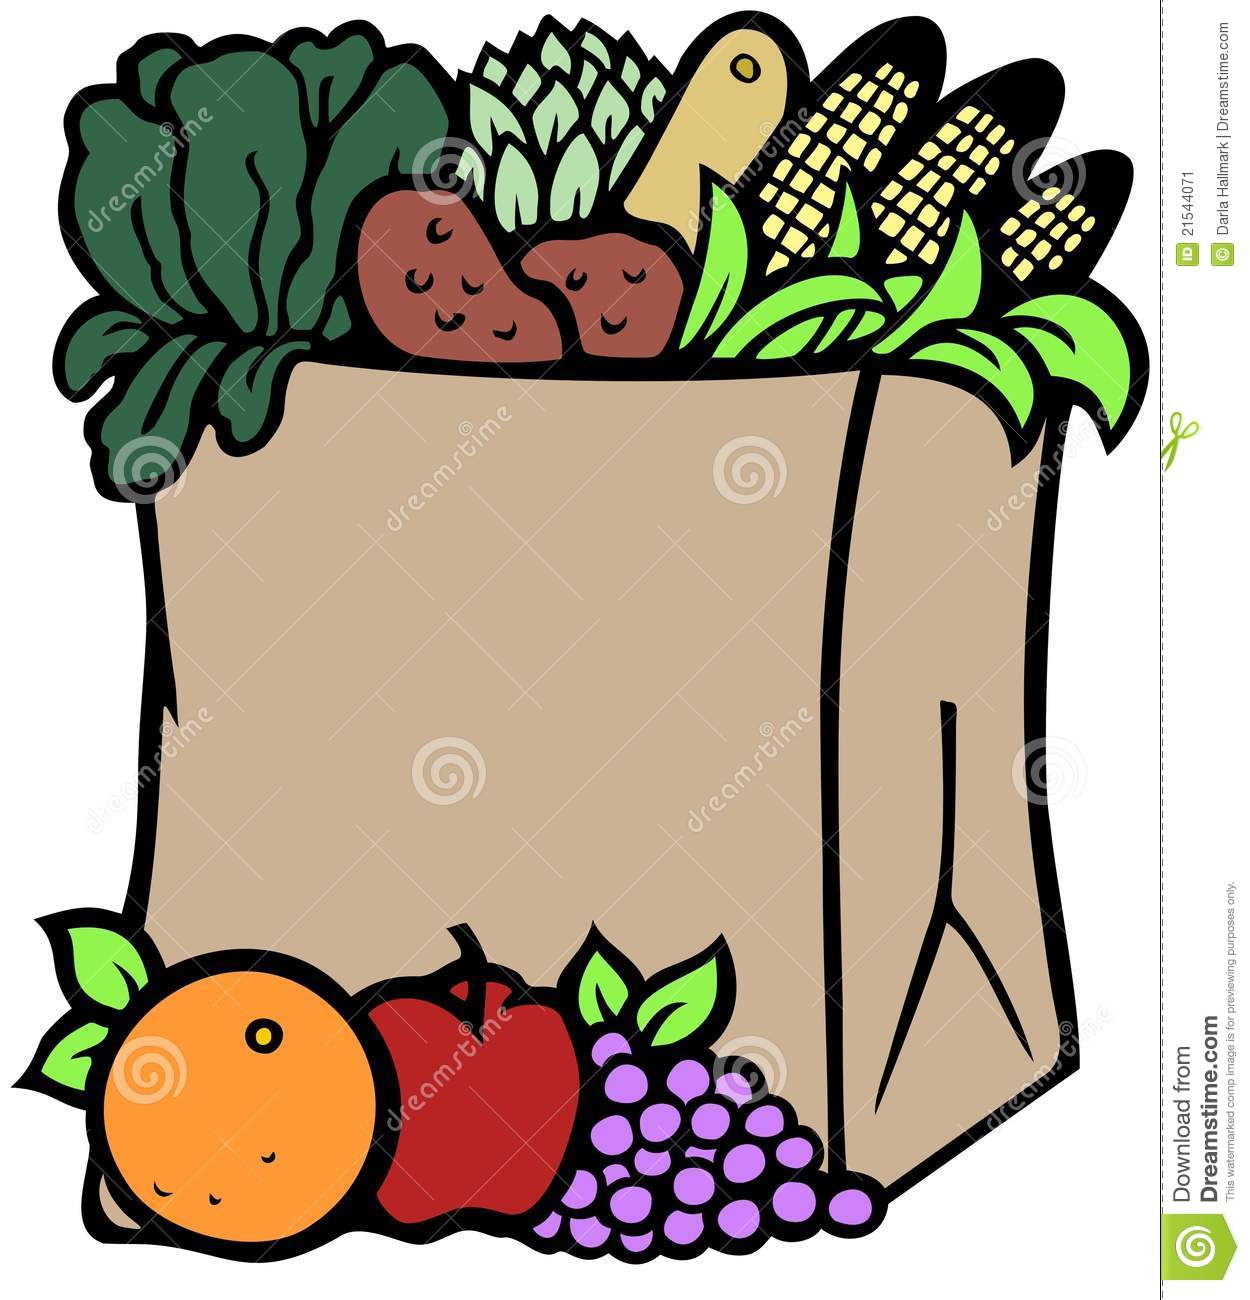 grocery clipart grocery bagger